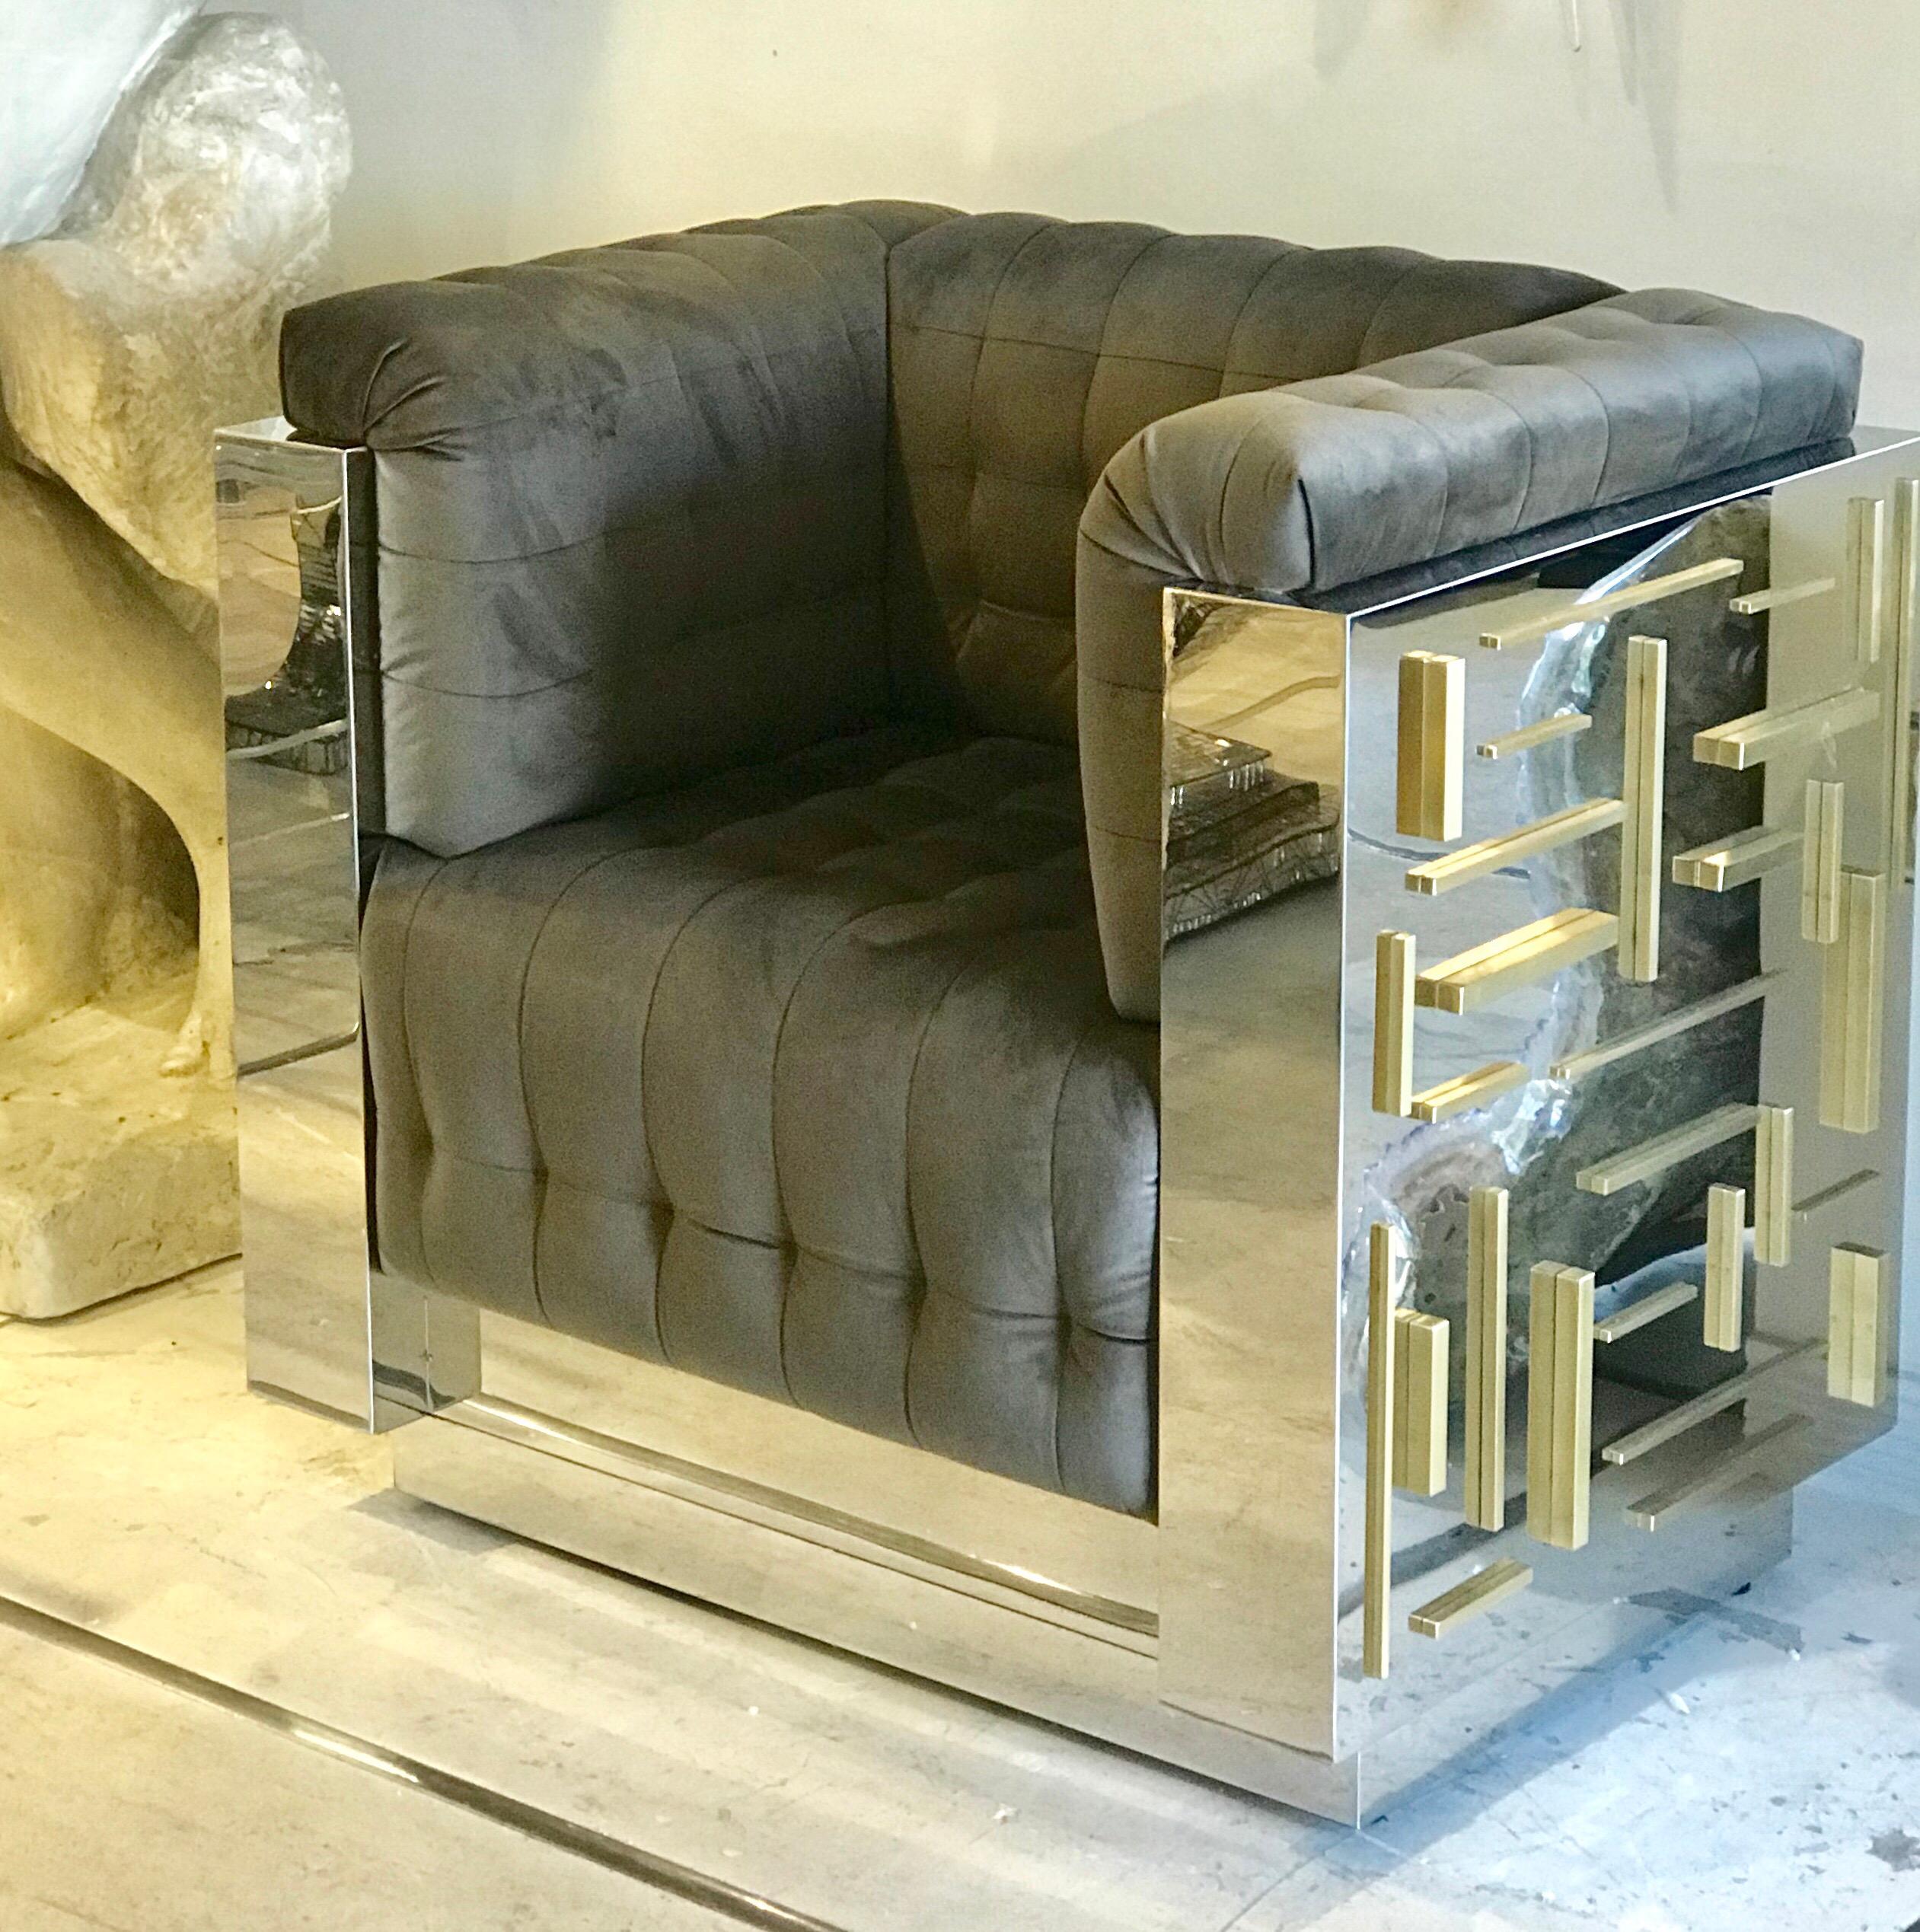 Sculptural custom made and handcrafted mirror polished stainless steel and brass set of 2 club chairs . A unique limited edition set available immediately.
Chairs measure: 33